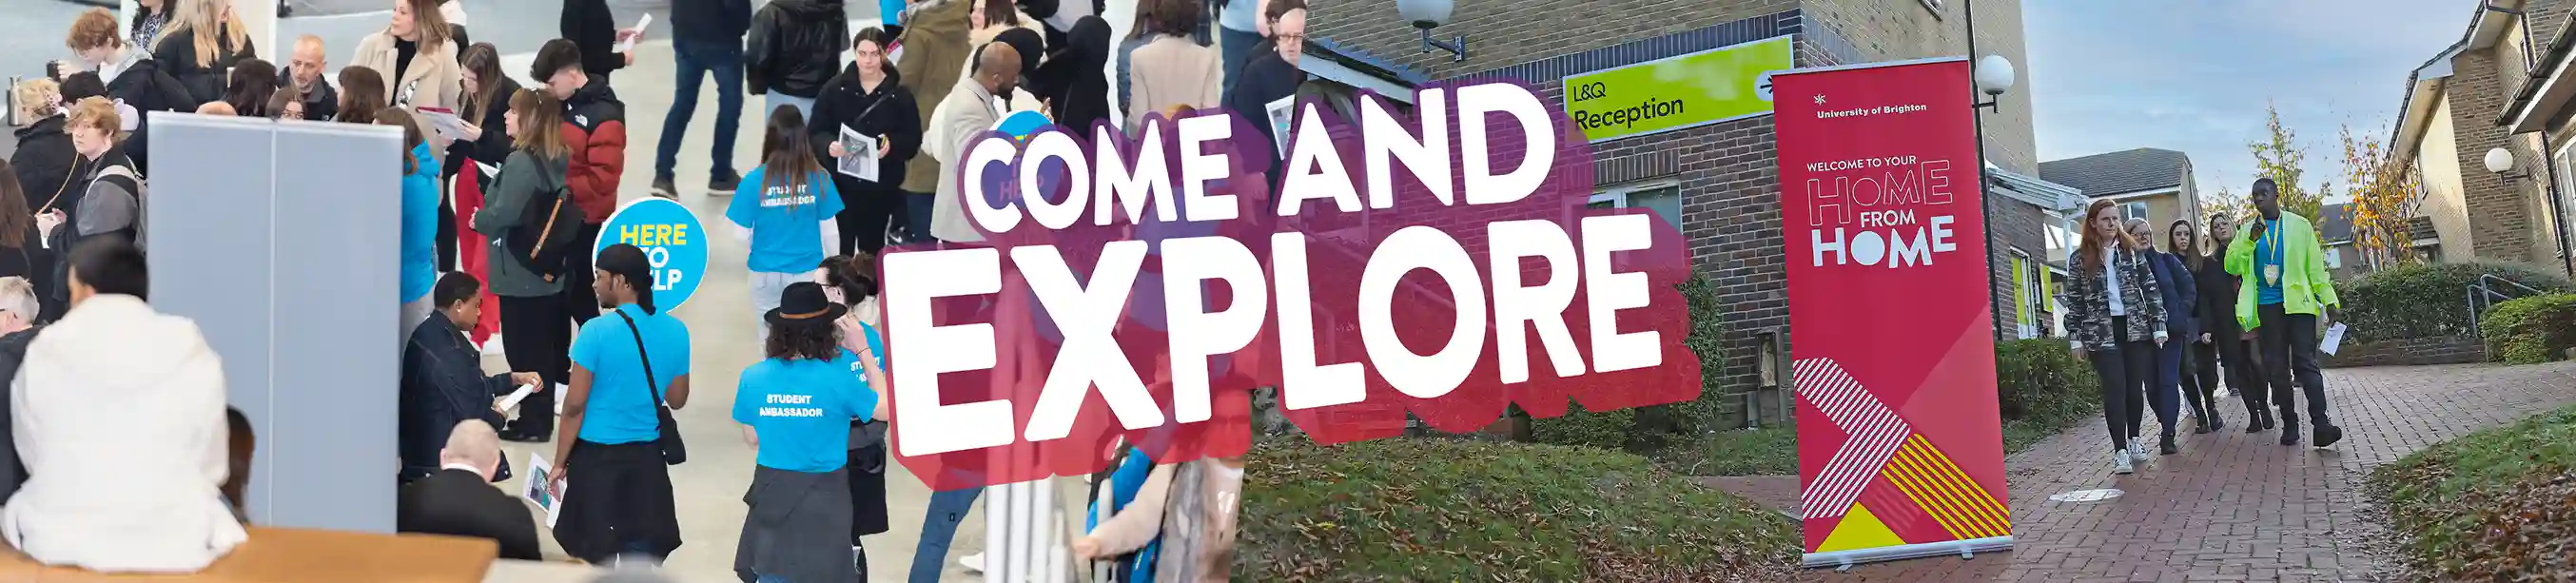 Two images of students at open days with the text 'Come and explore' overlayed